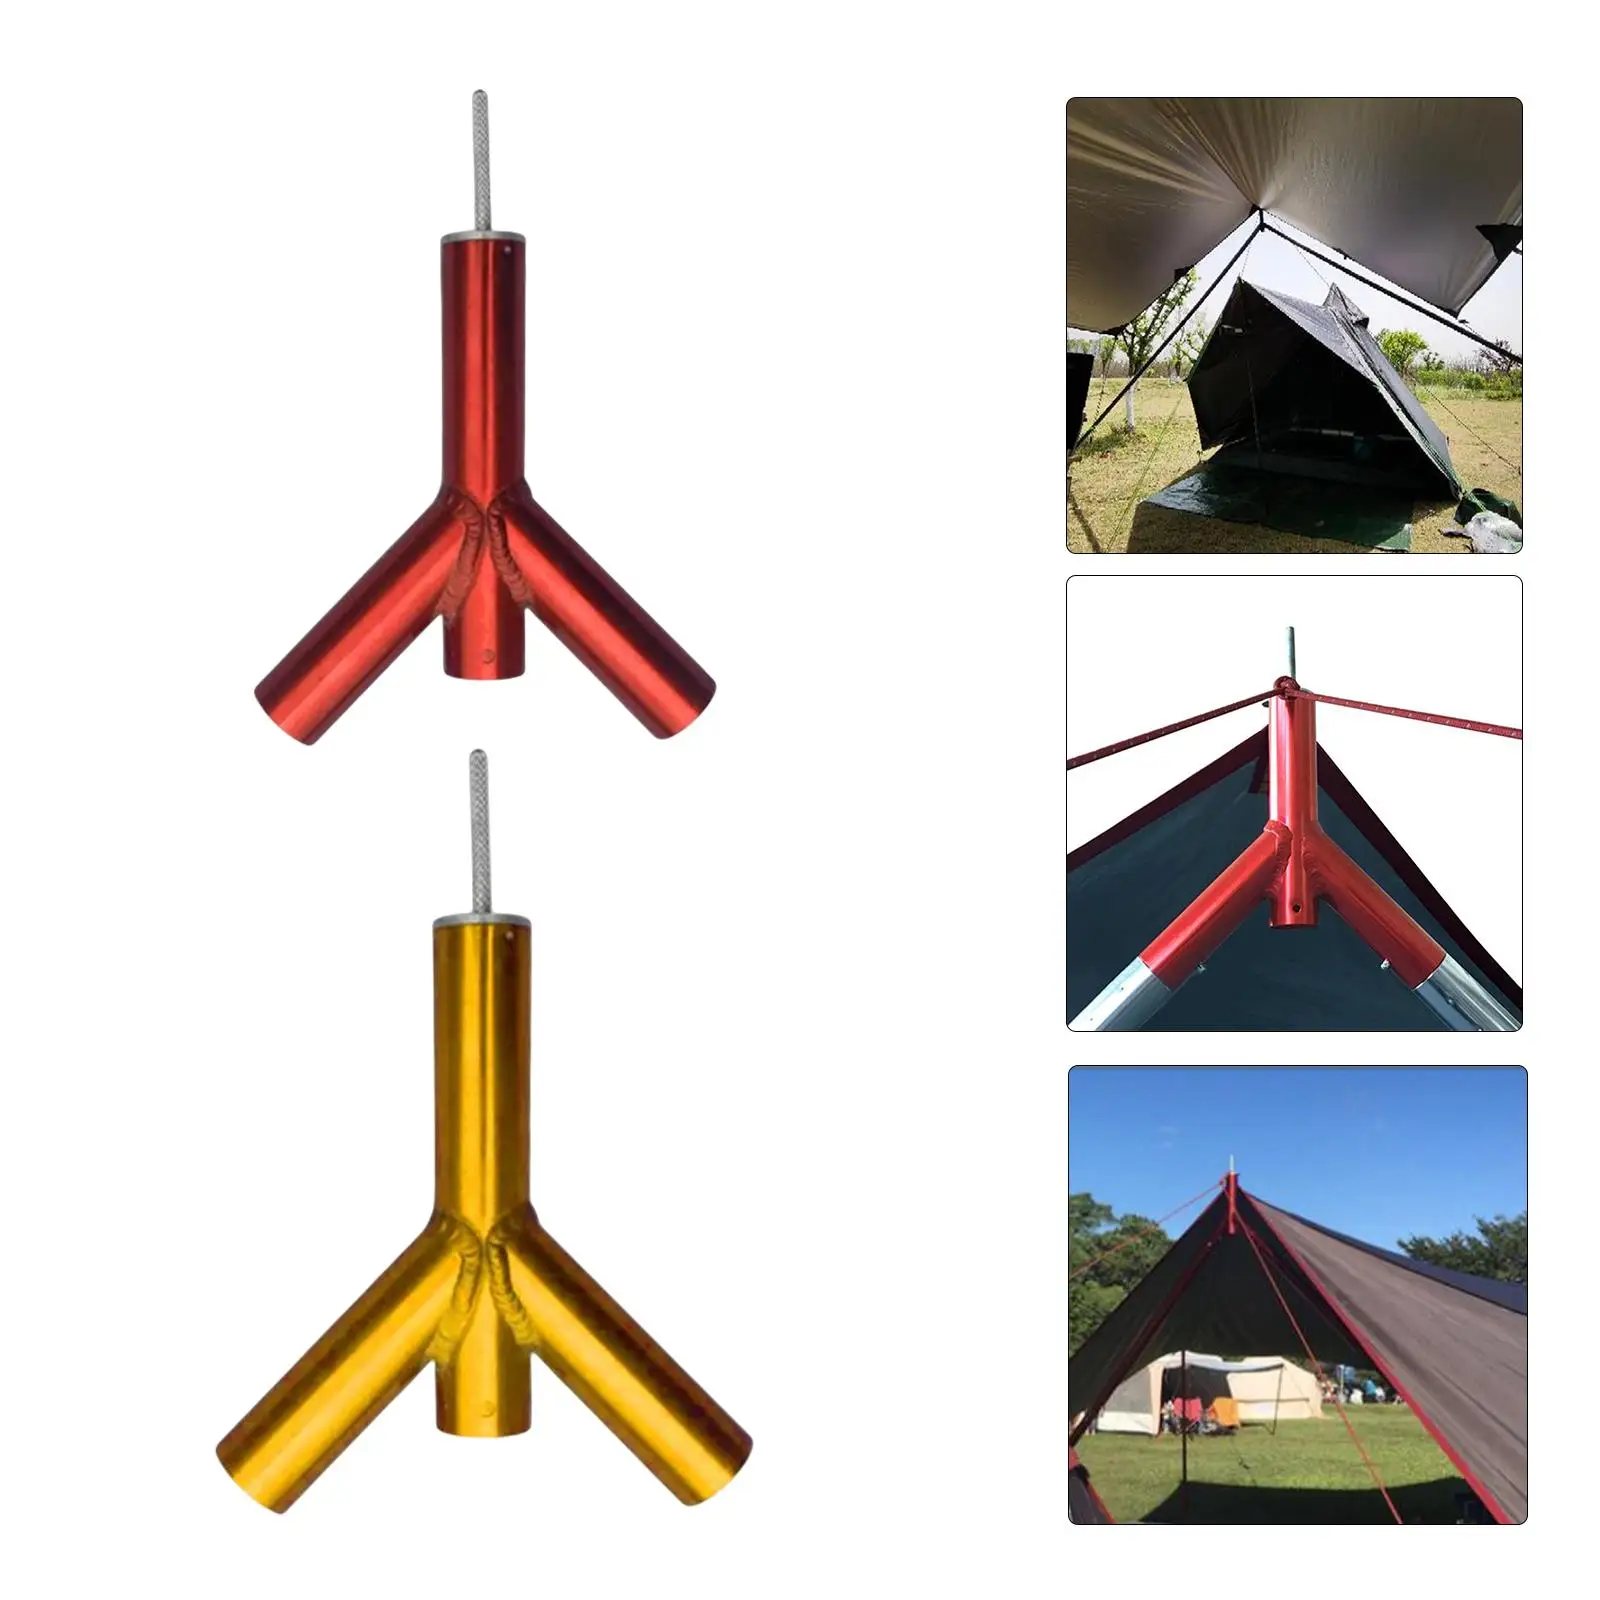 Portable Camping Tent Tarp Poles Canopy Awning Rod Shelters Stand Outdoor Stick for Sunshade Hiking Backpacking Tent Fly